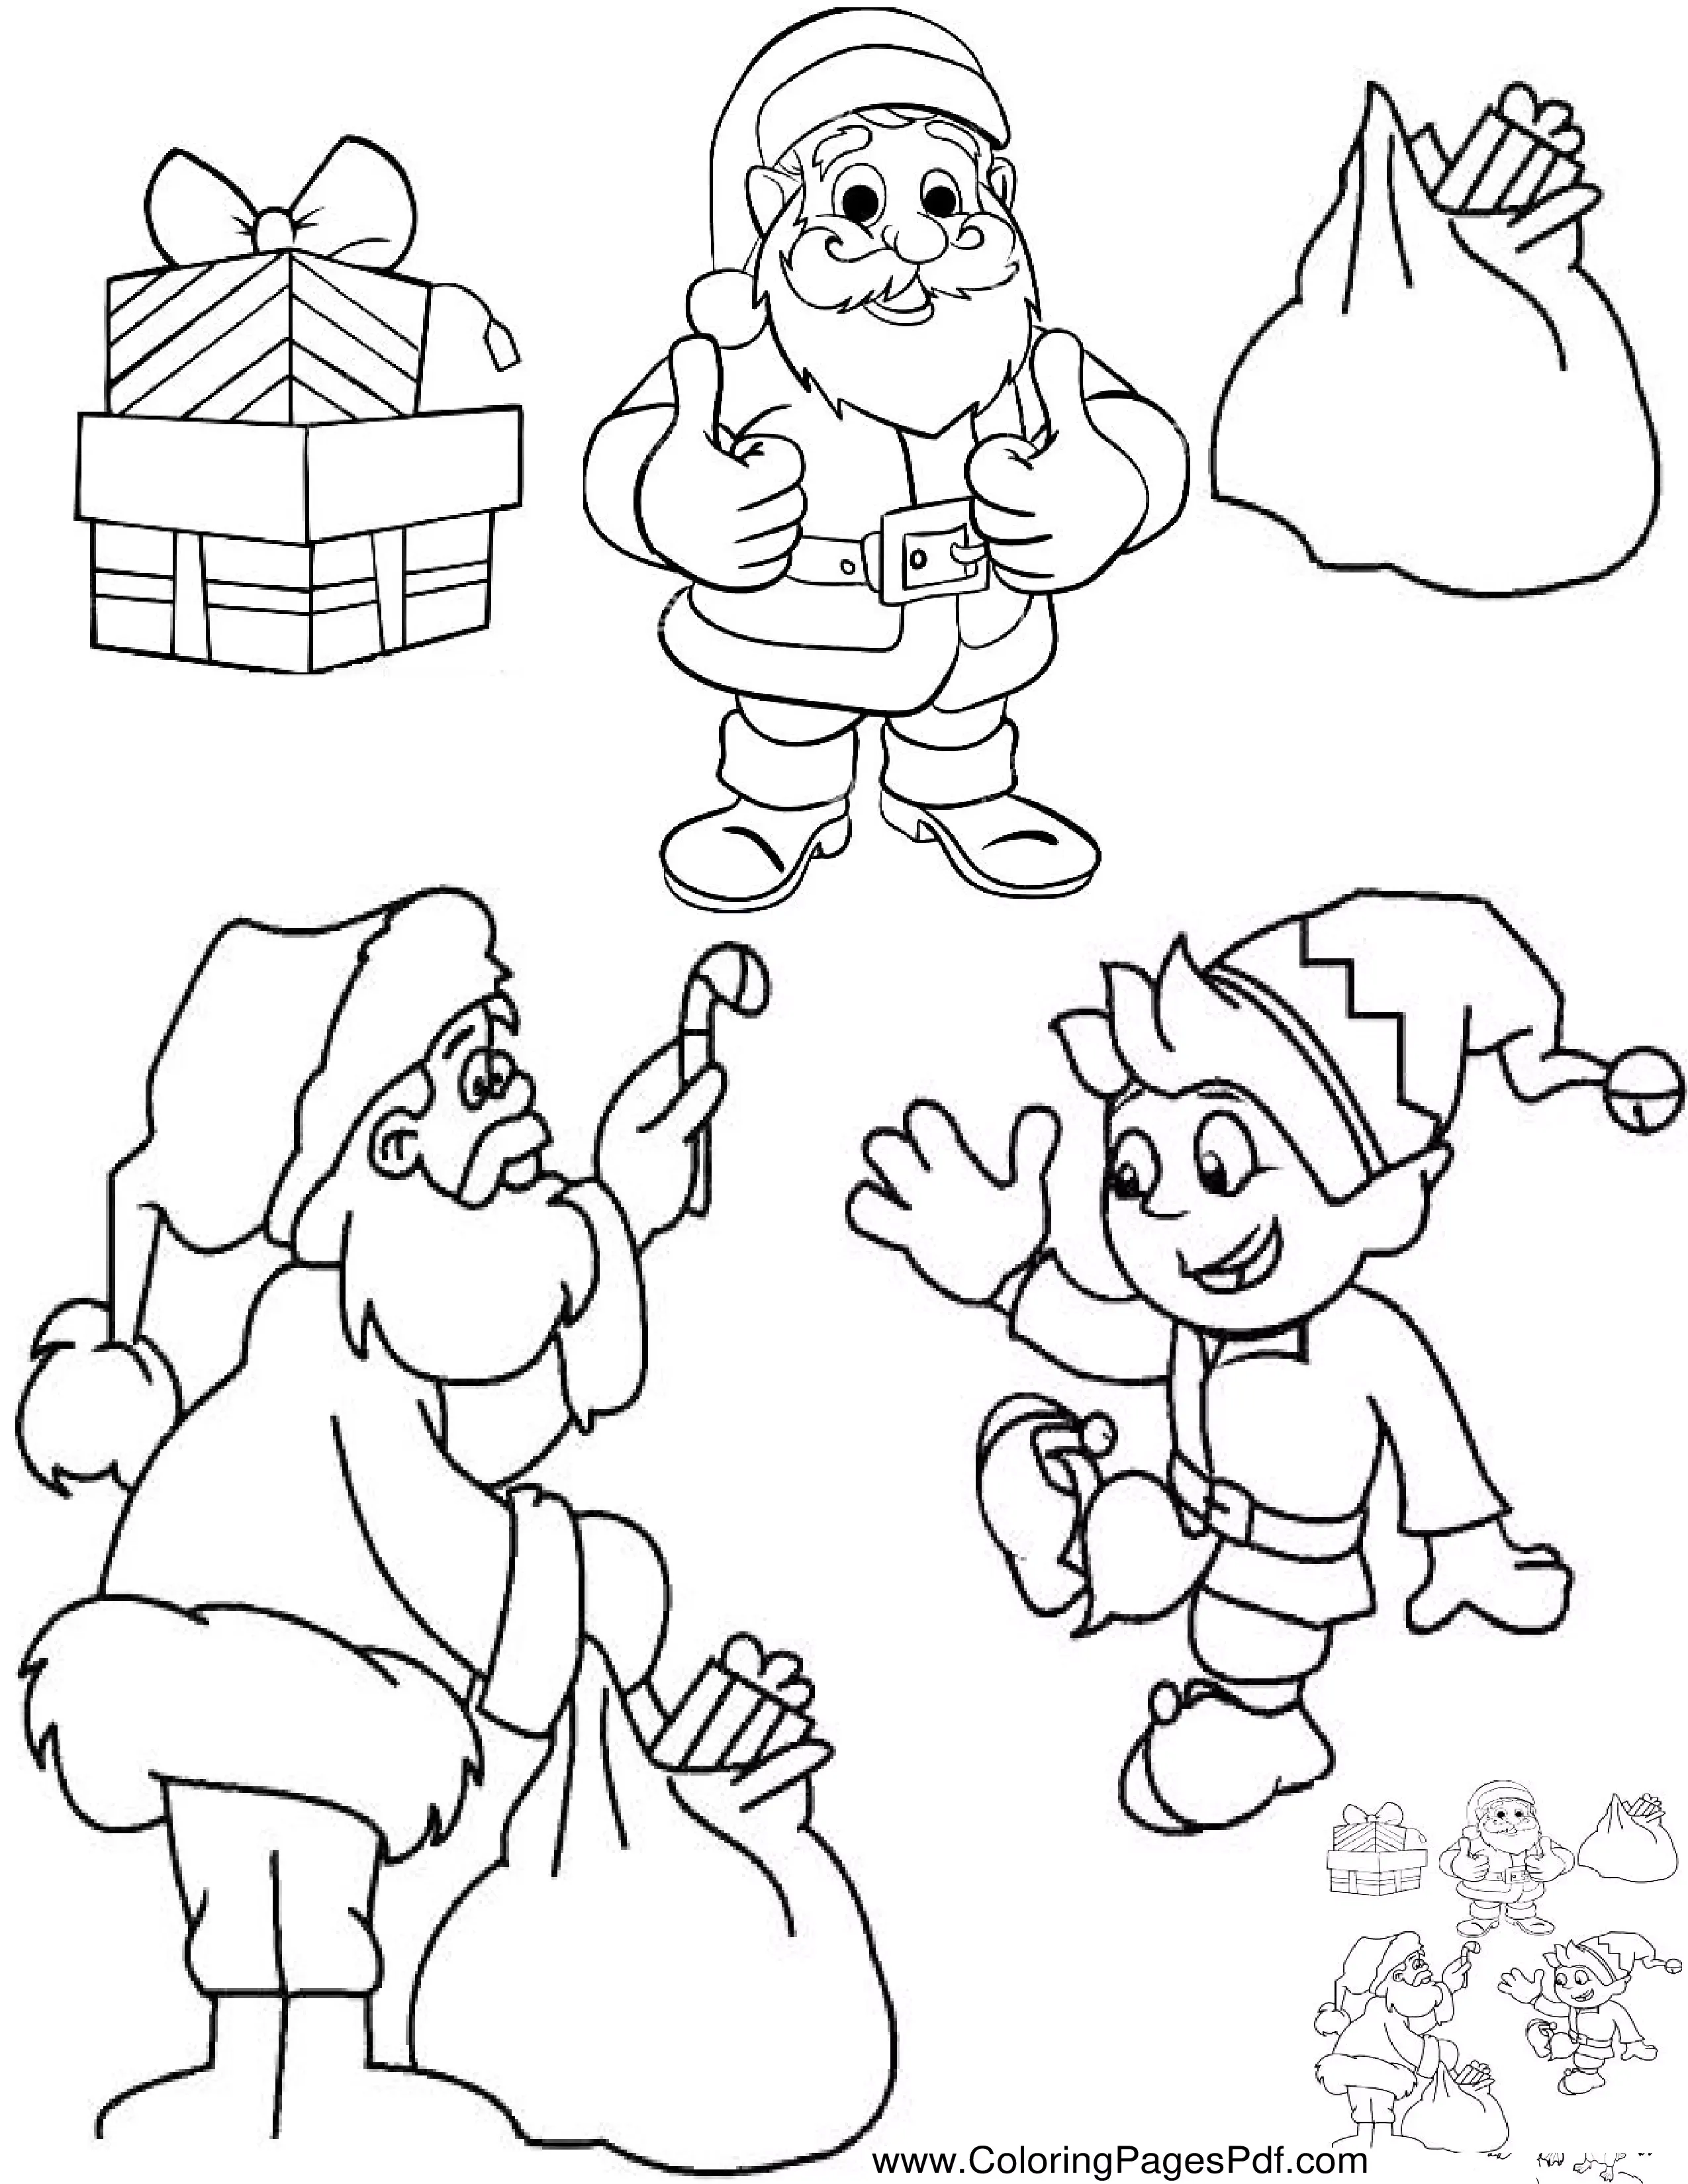 Christmas Elf on the shelf coloring pages